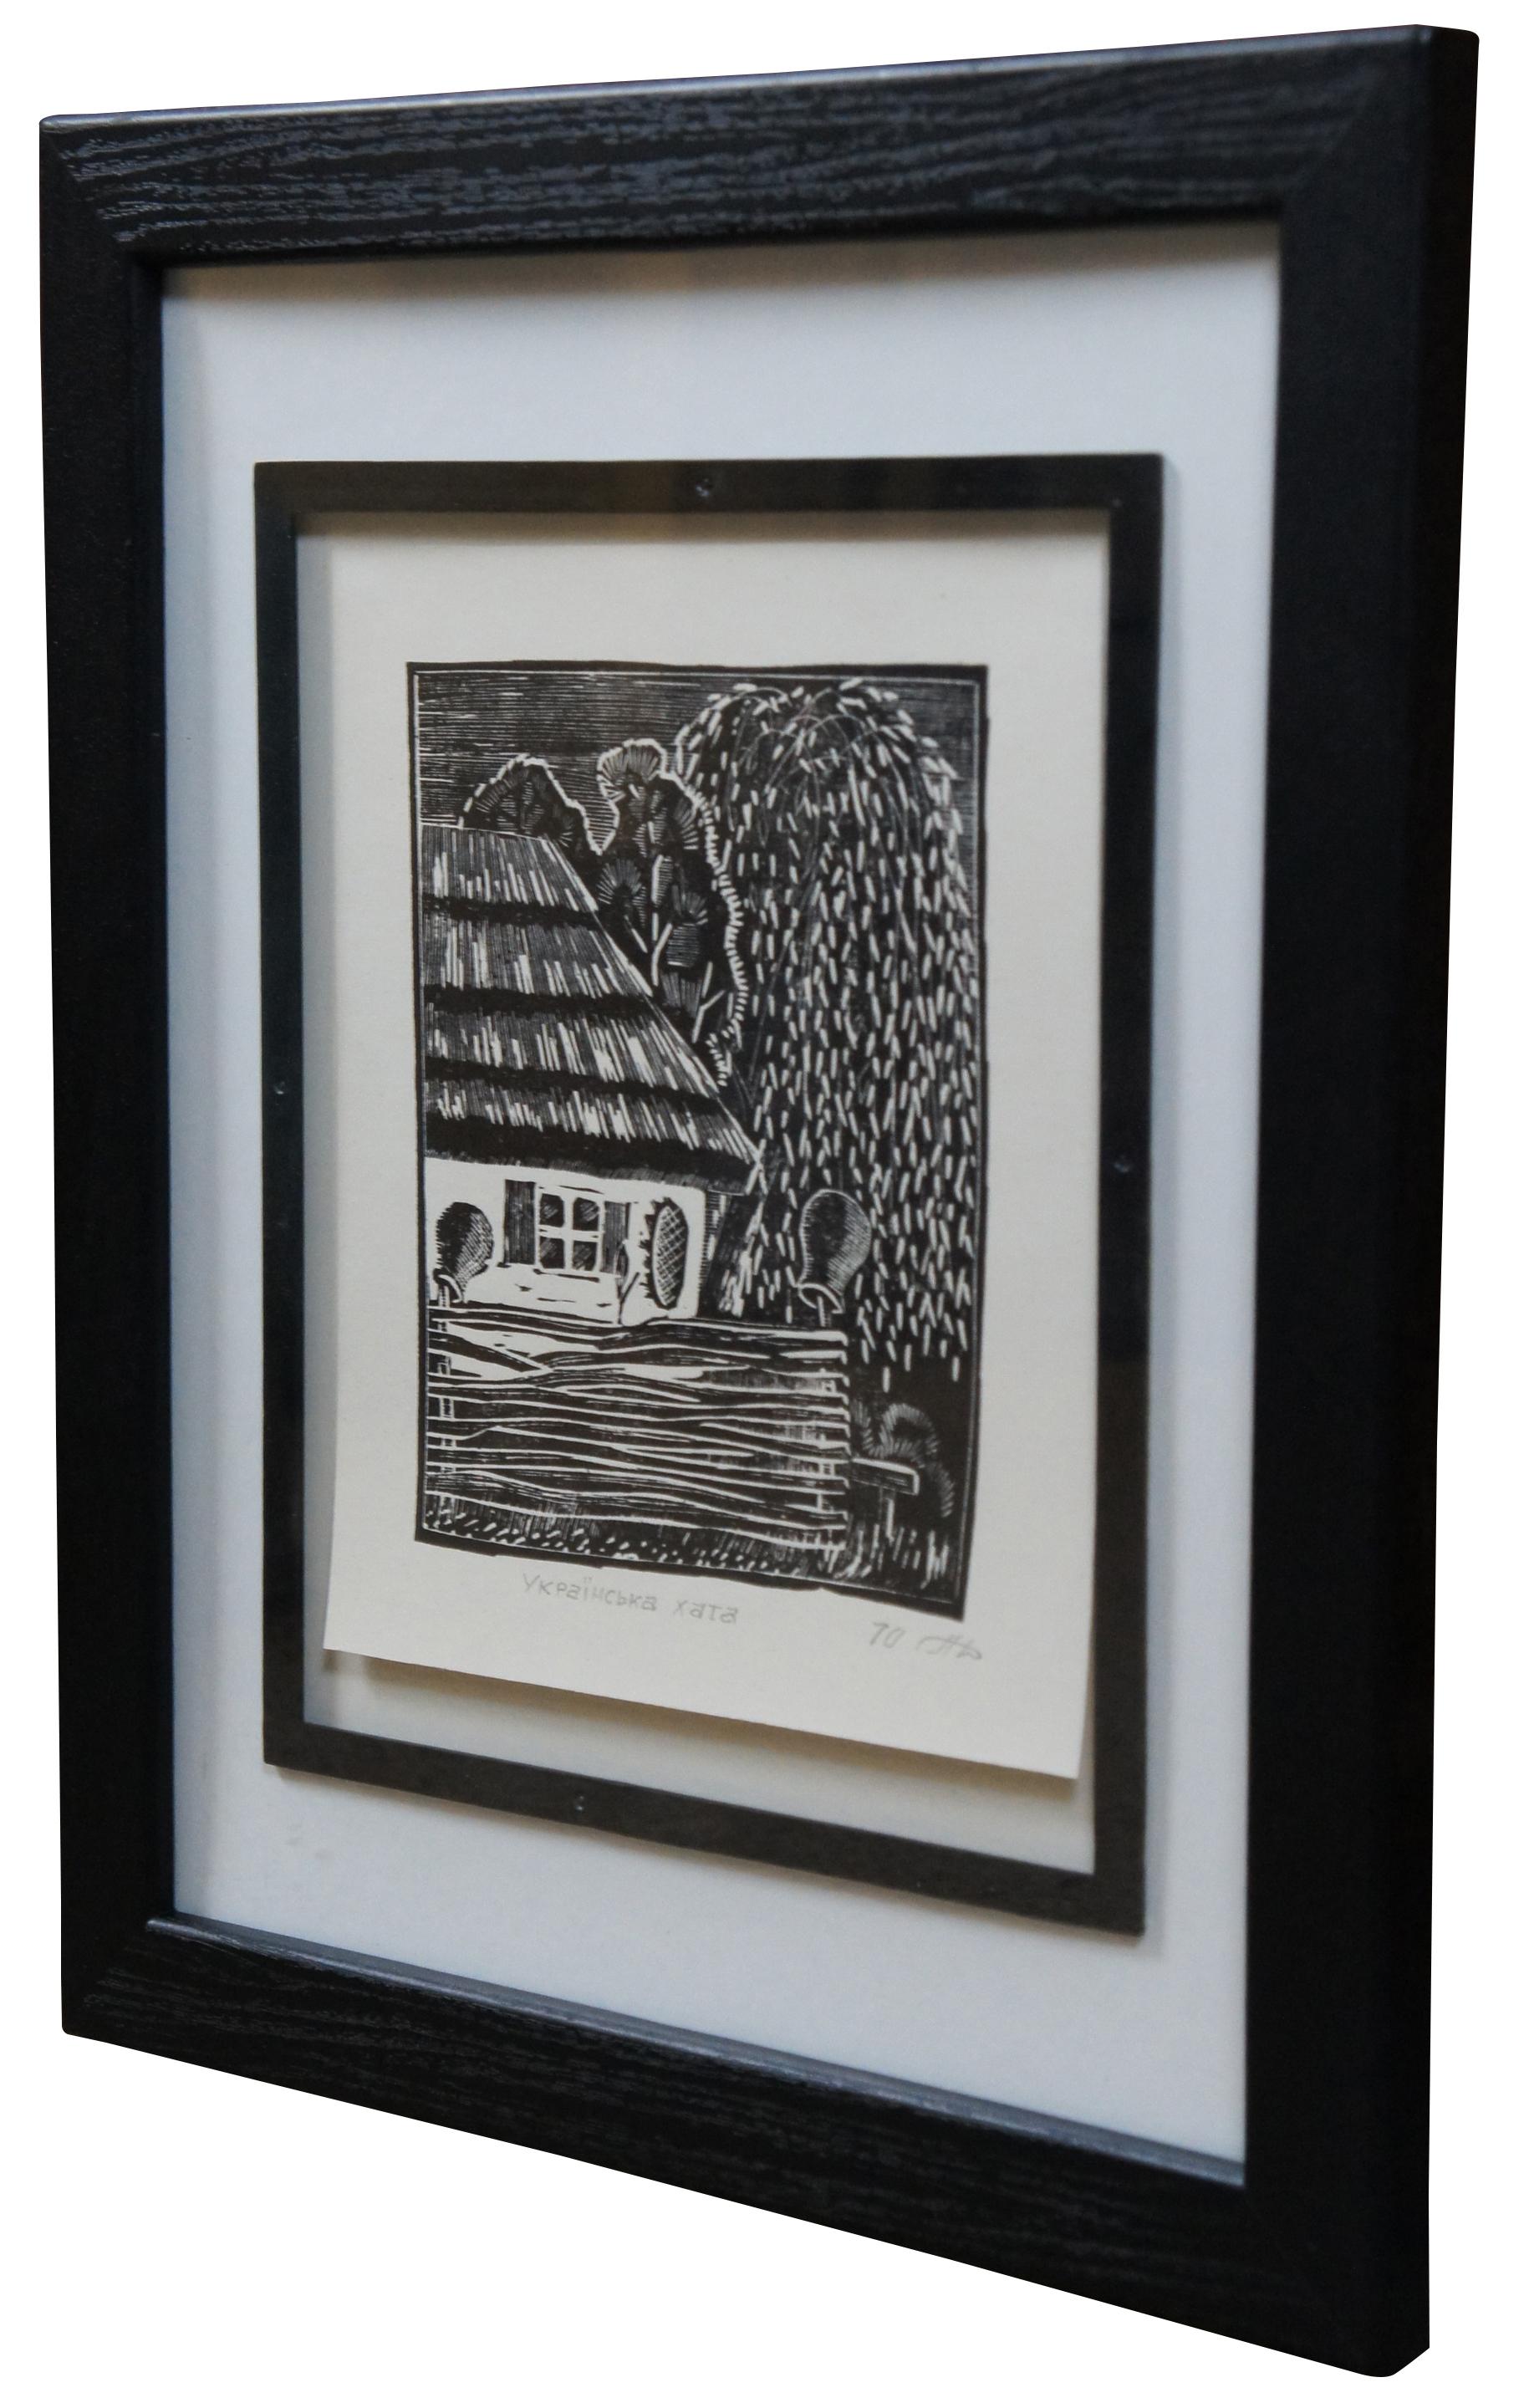 Vintage 1970 black and white Ukrainian etching by Lanyak Dmytro Oleksiiovych showing a country cottage or farmhouse. Titled and dated in pencil by the artist. Lanyak Dmytro Oleksiiovych (AKA Lanyak Dmitry Alekseevich, AKA ????? ?????? ?????i?????)